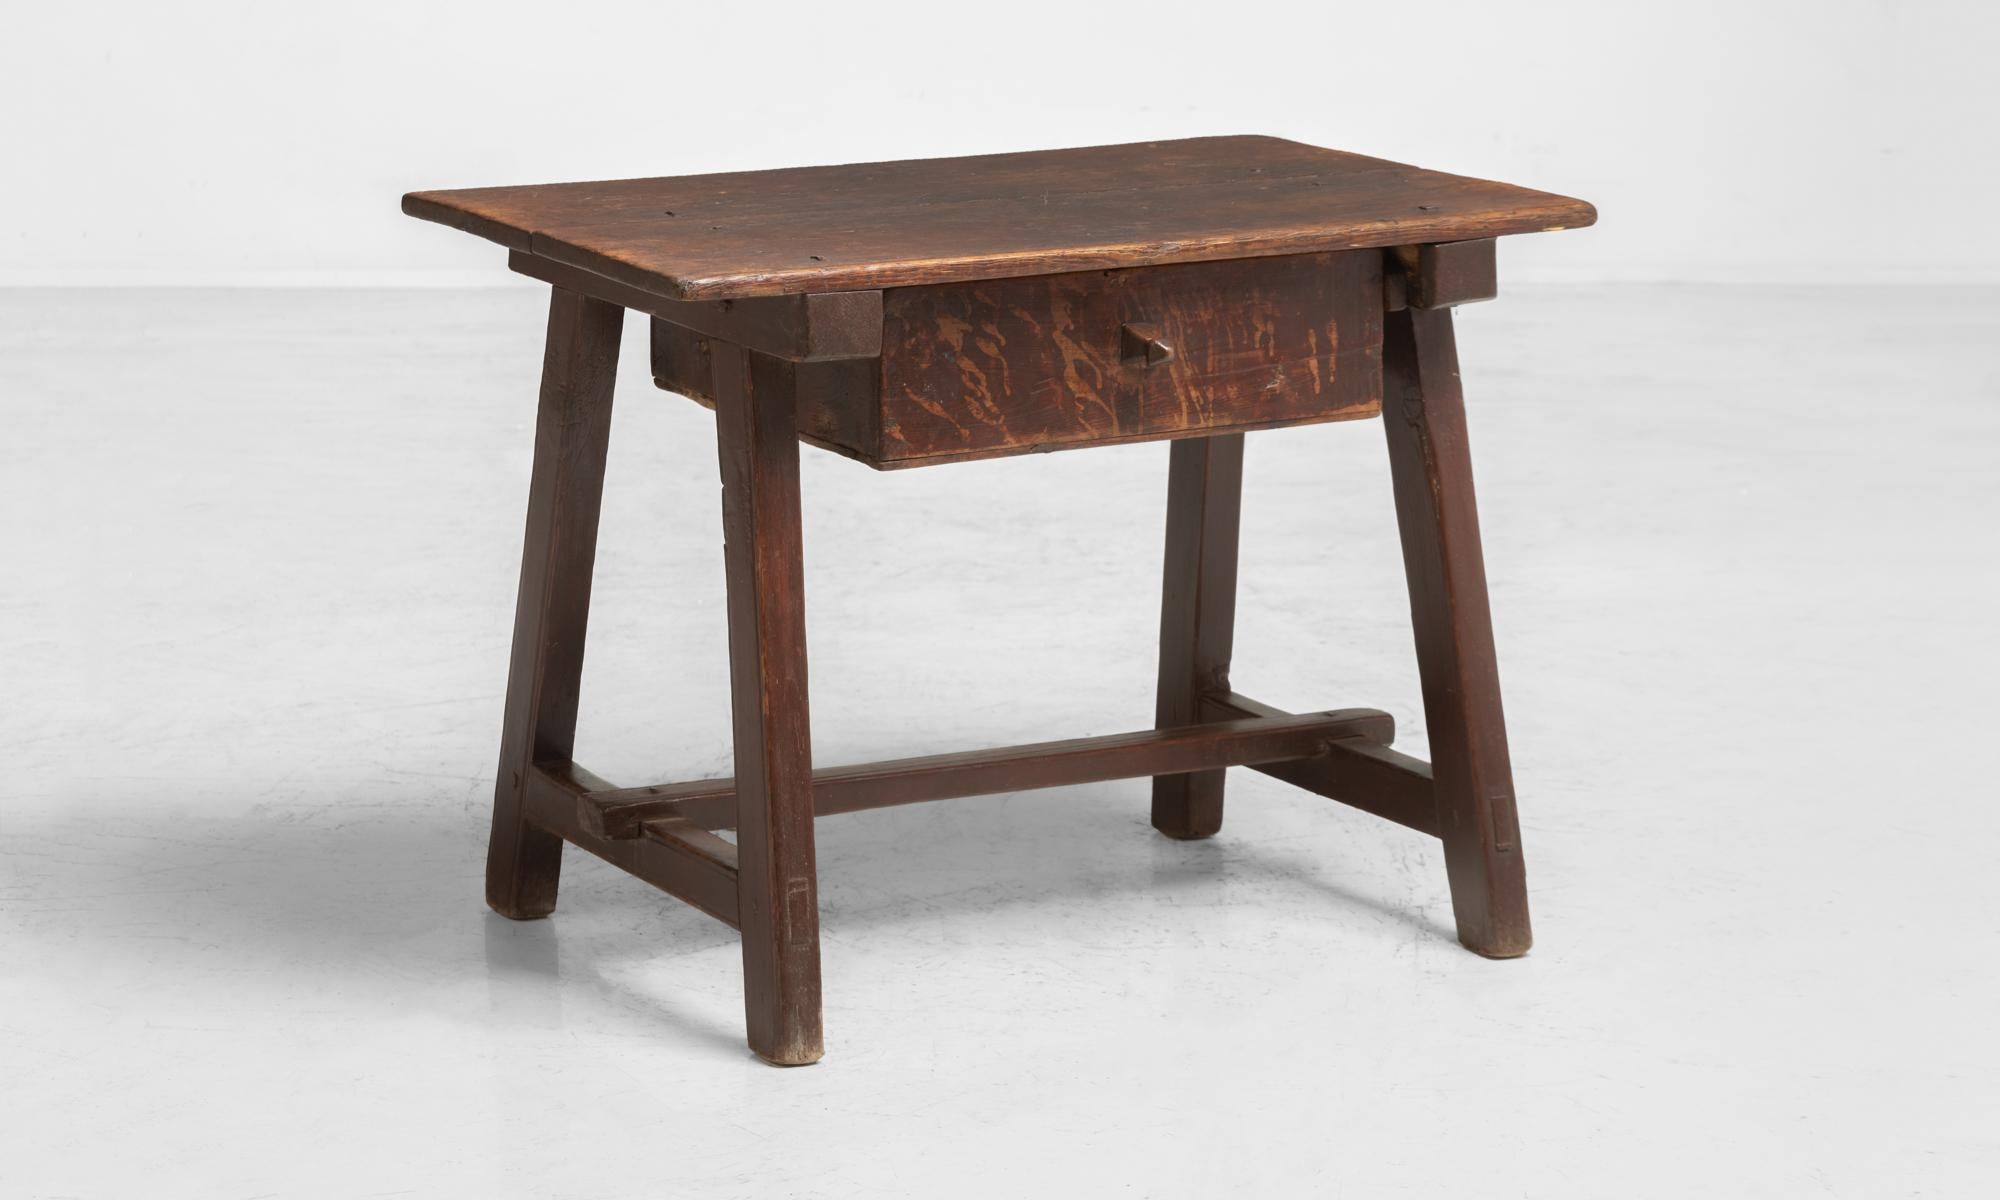 Country Pine Table, Spain, circa 1840

Simple construction includes a pull-out drawer and wonderful patina.